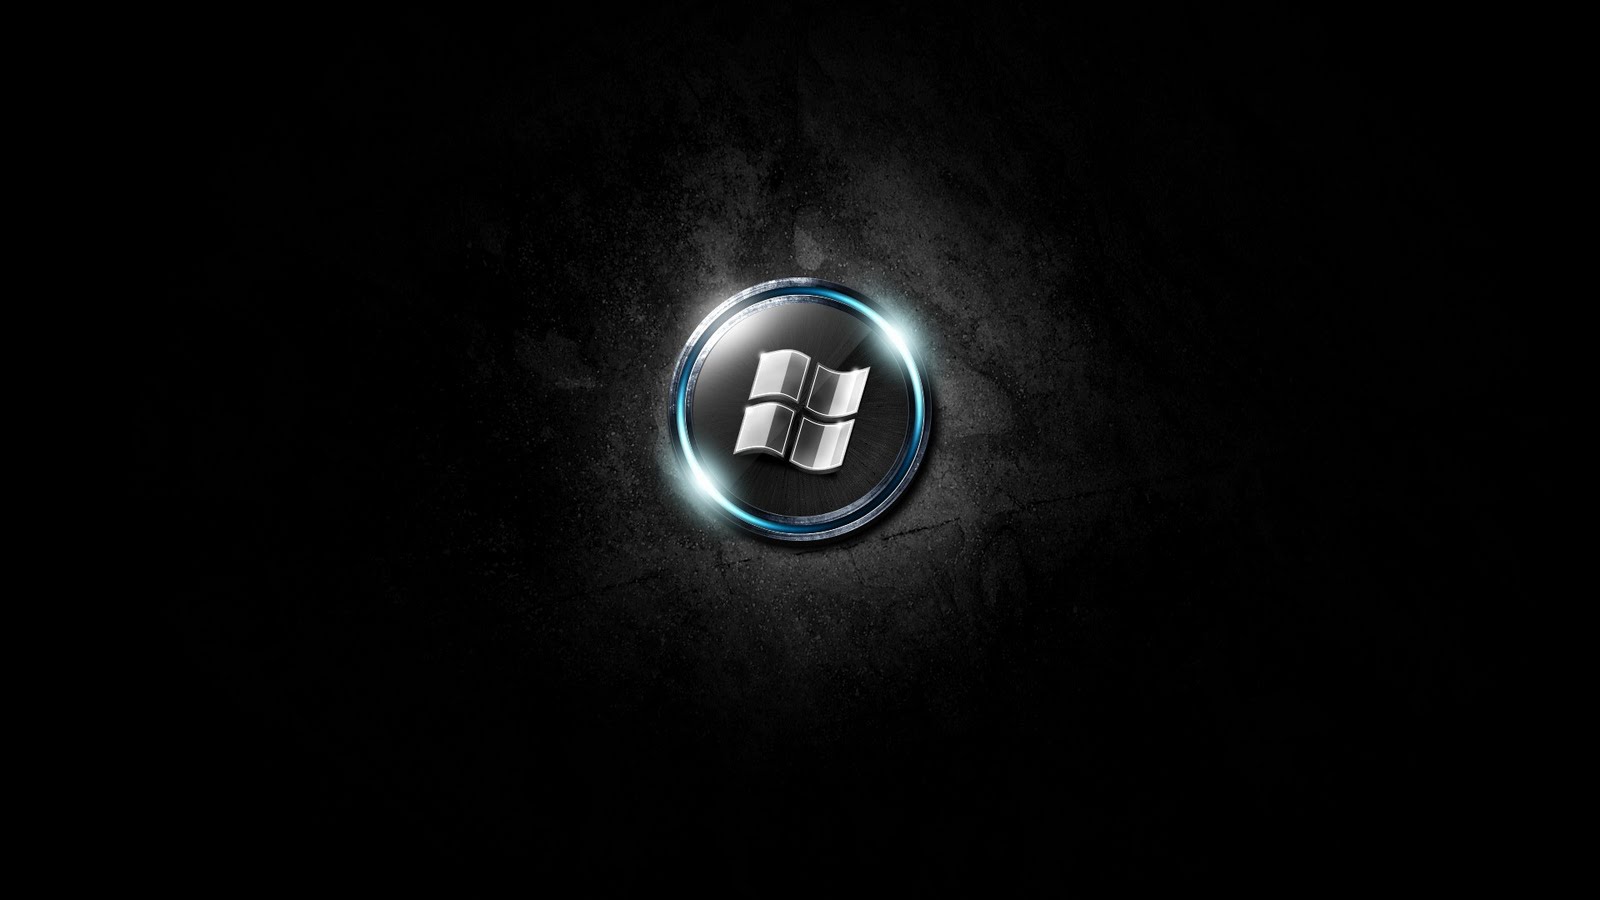 Of Cool Windows Logo Full HD Wallpaper Is A Great For Your